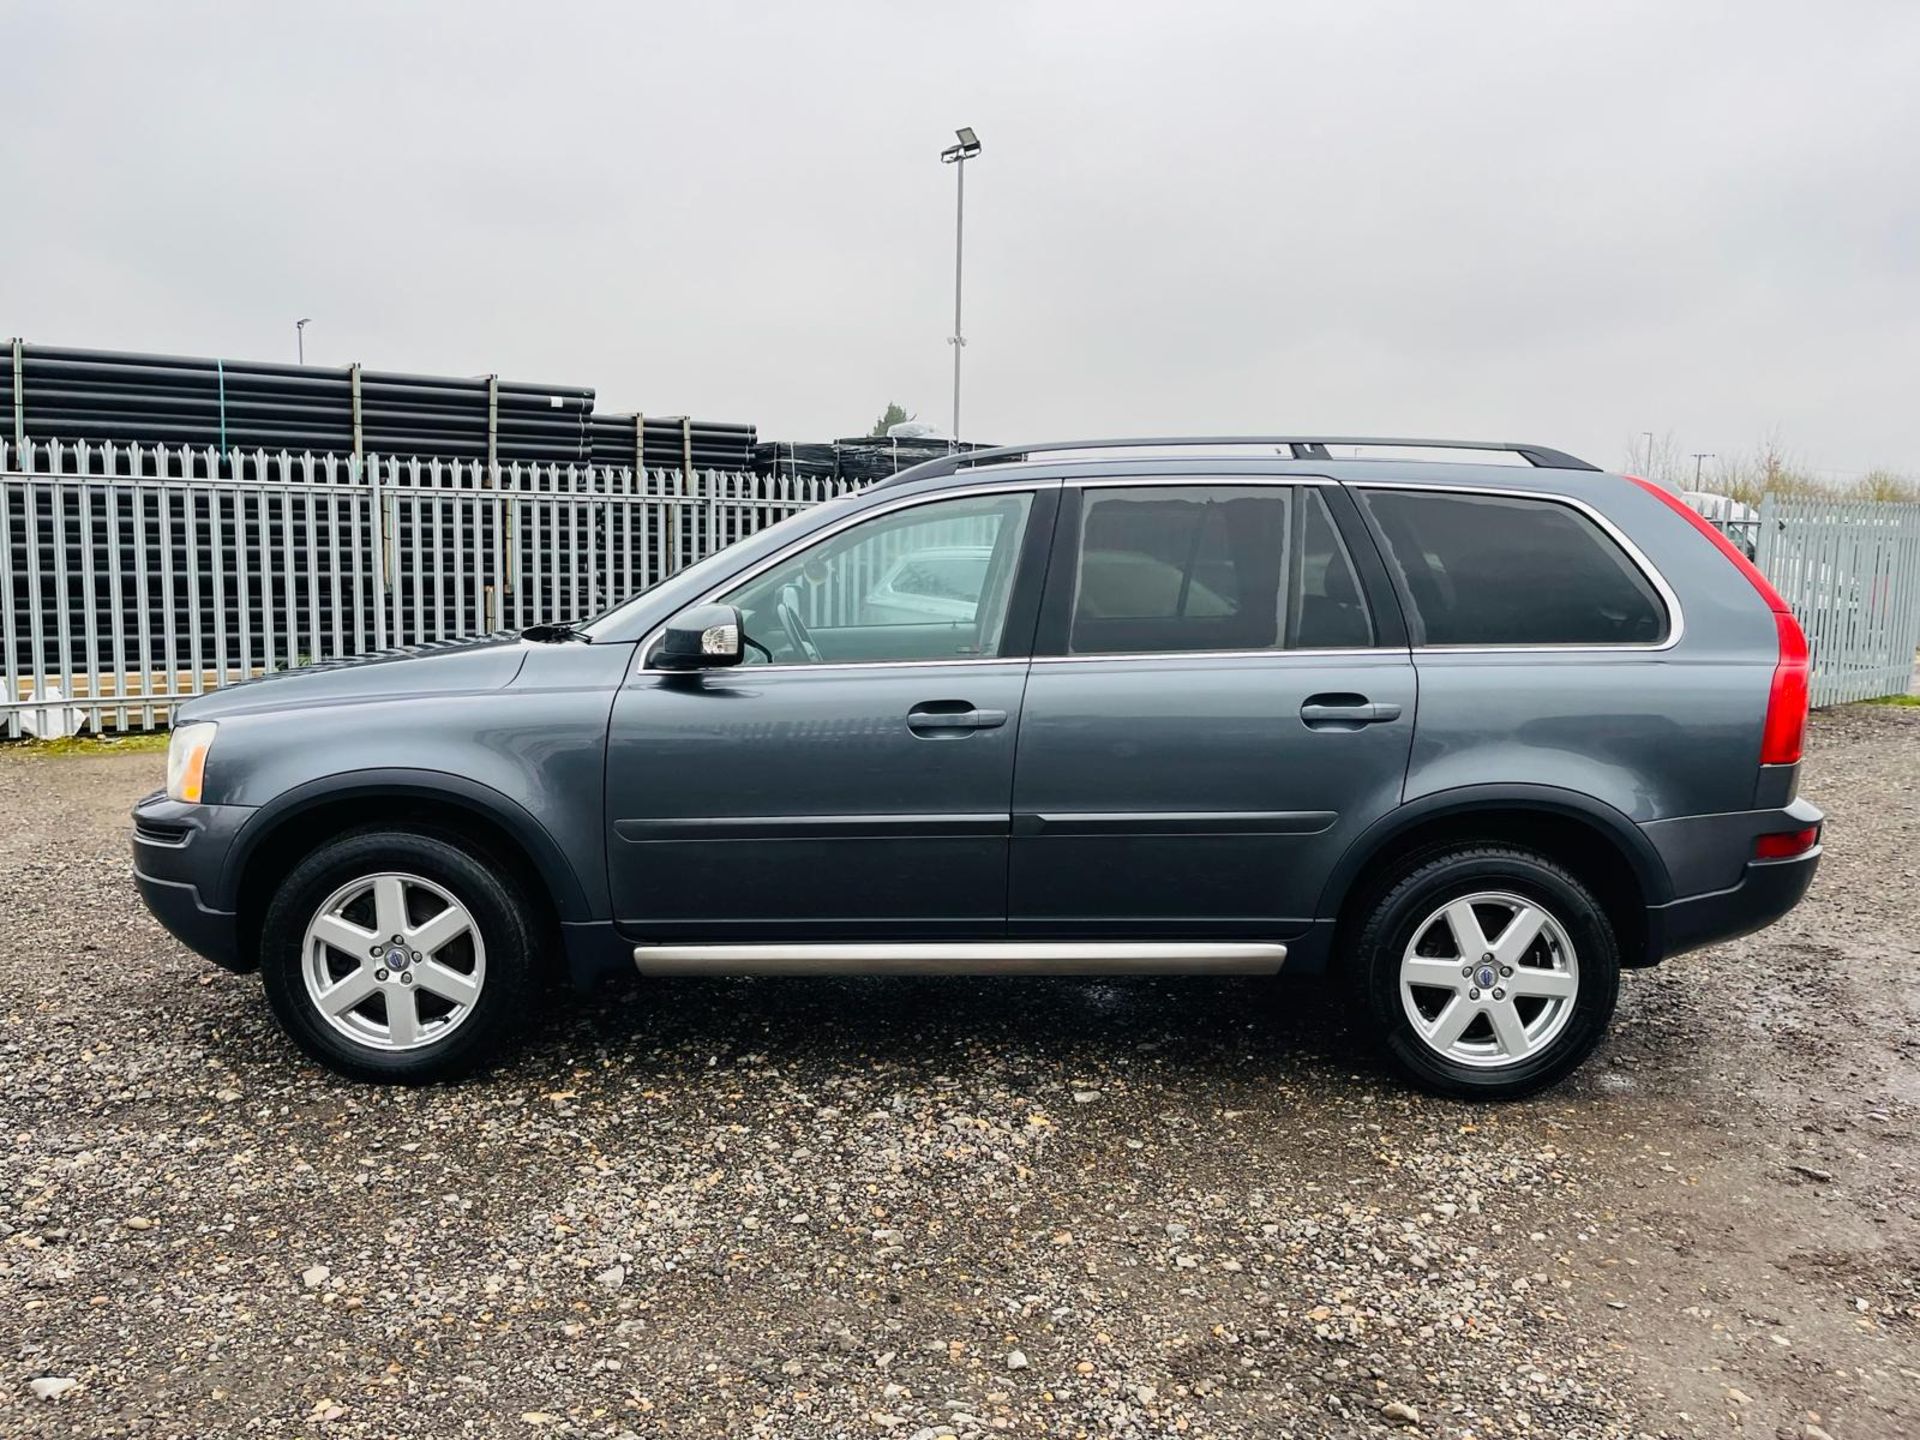 ** ON SALE ** Volvo Xc90 Active Automatic D5 185 Geartronic -Air Conditioning-Bluetooth Handsfree - Image 4 of 36